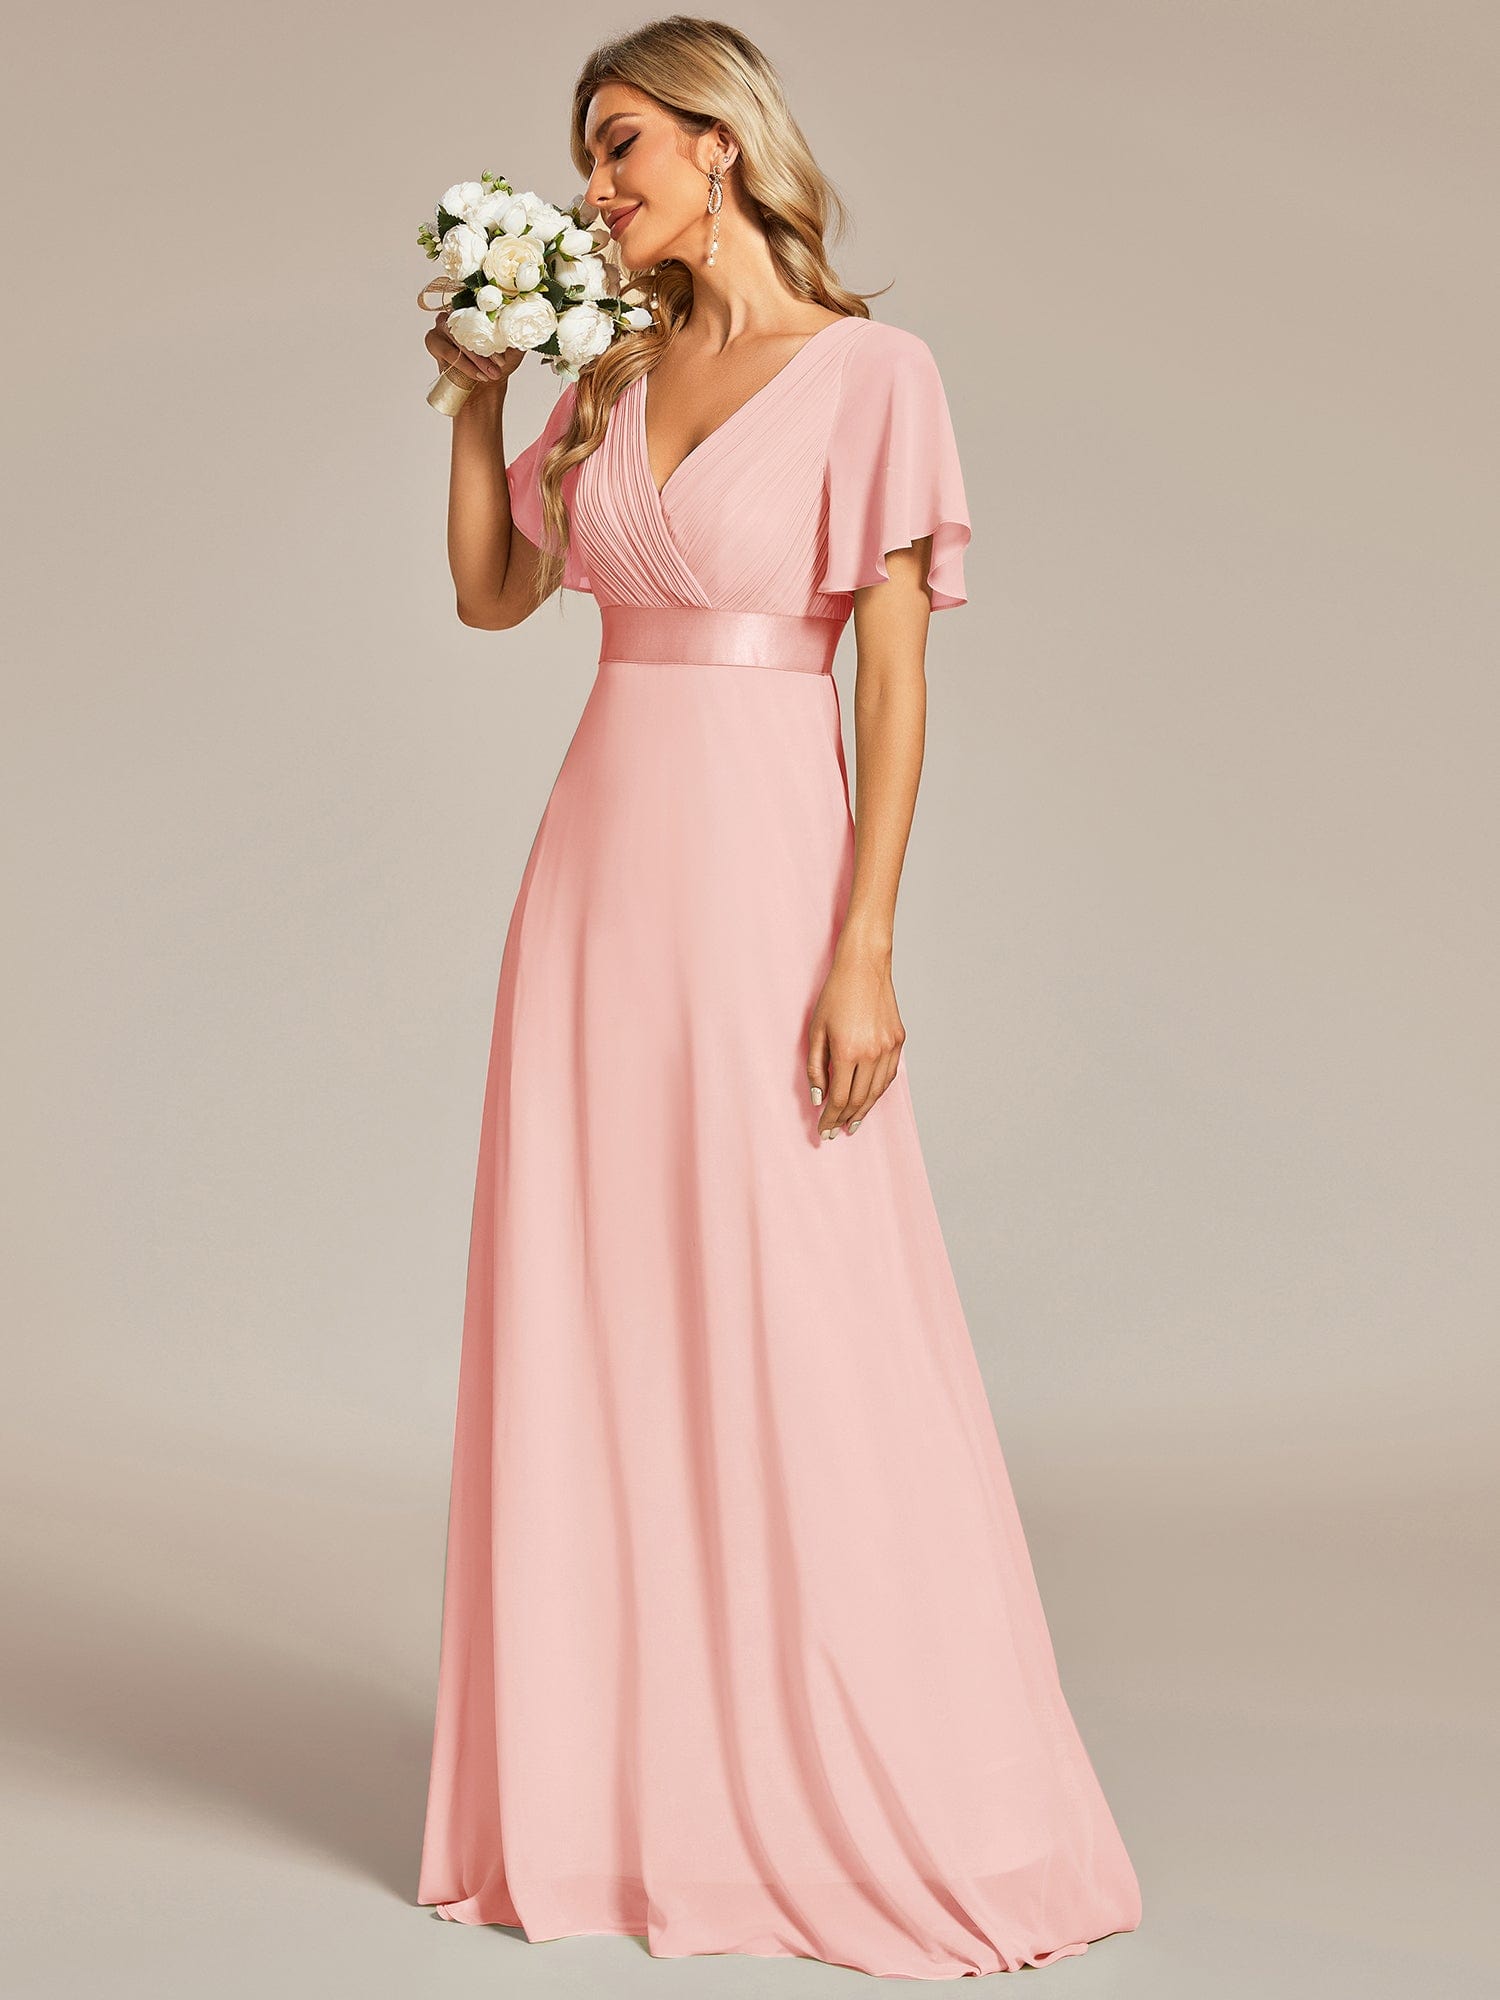 Long Empire Waist Bridesmaid Dress with Short Flutter Sleeves #color_Pink